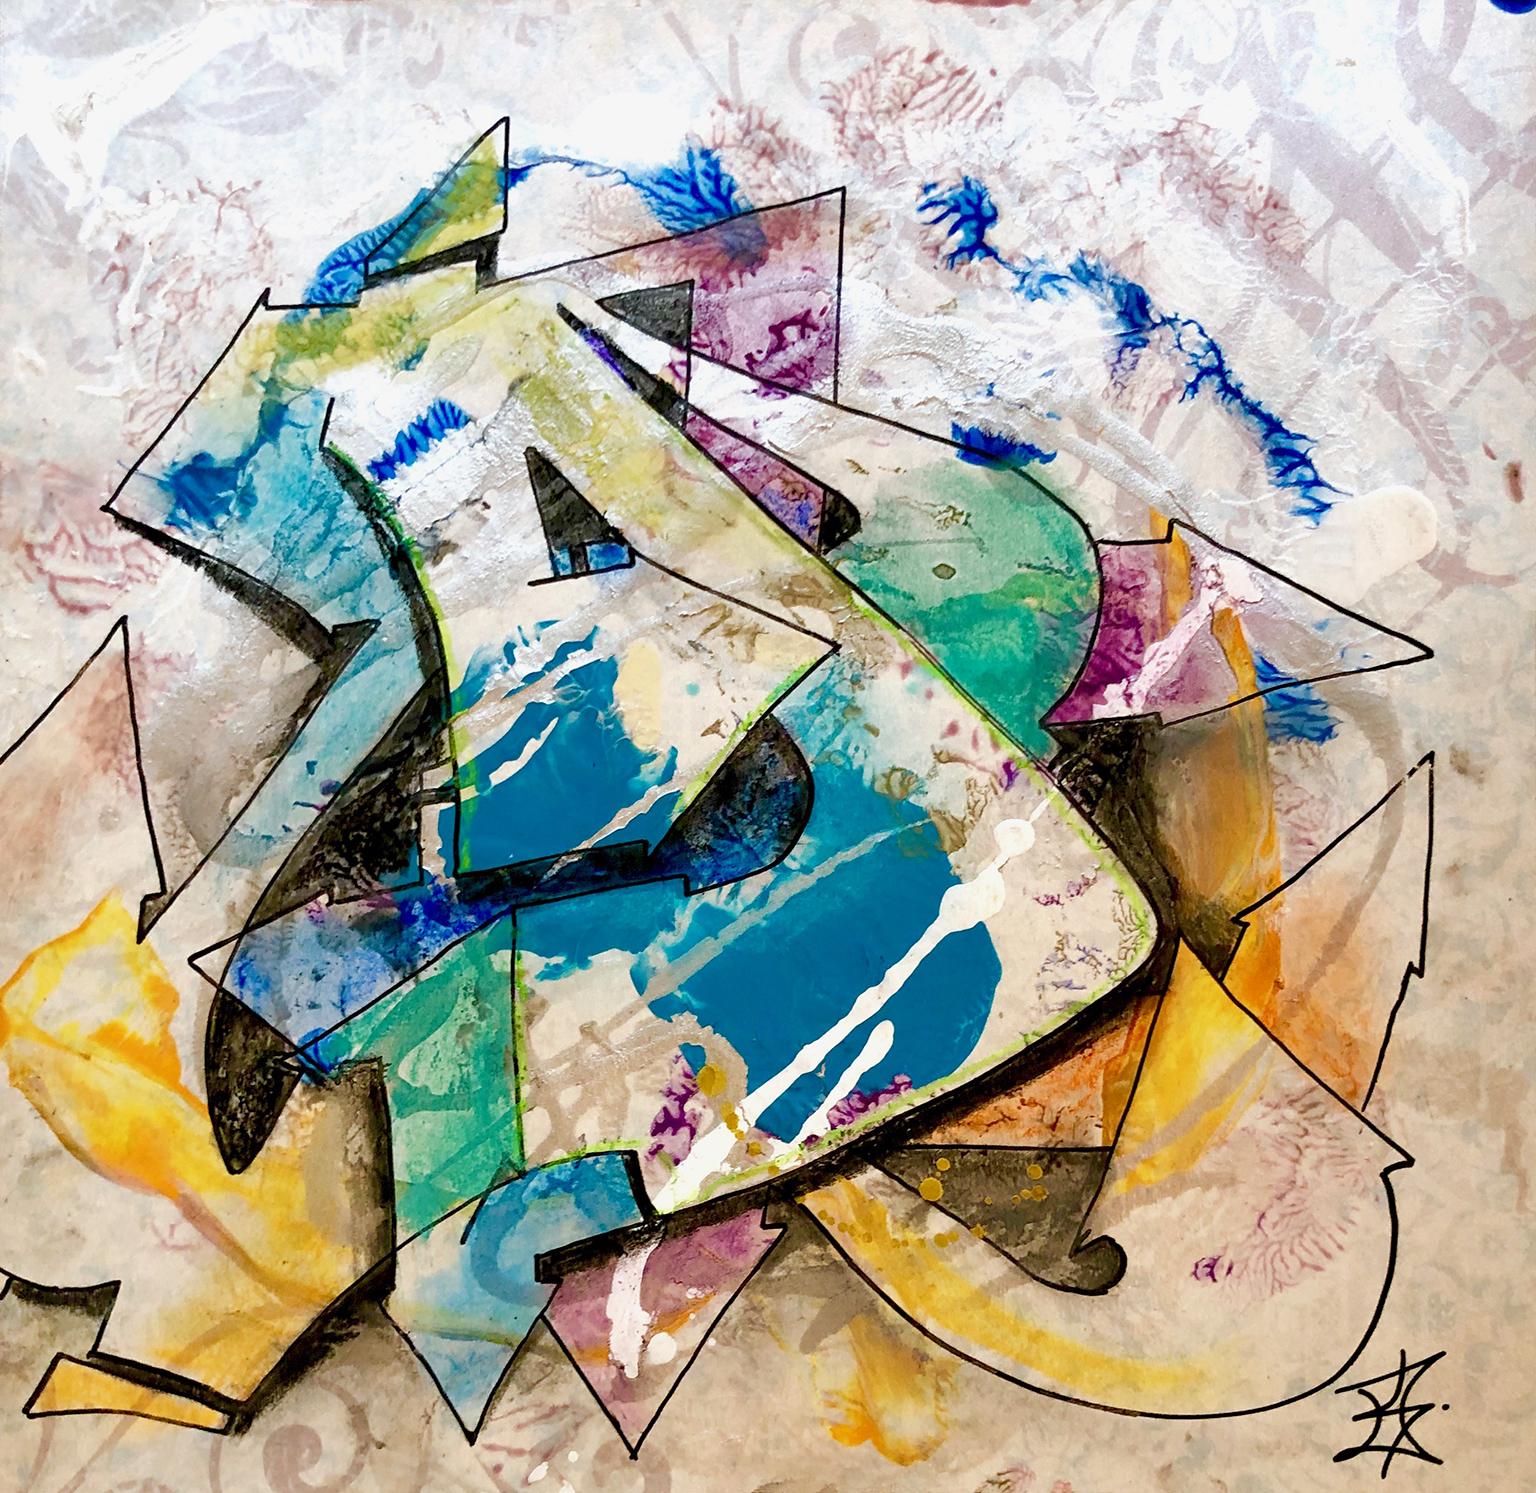 Kelography Letters (Graffiti "D" Urban Graphic) / Limited ed. 25  - Mixed Media Art by Kel1st